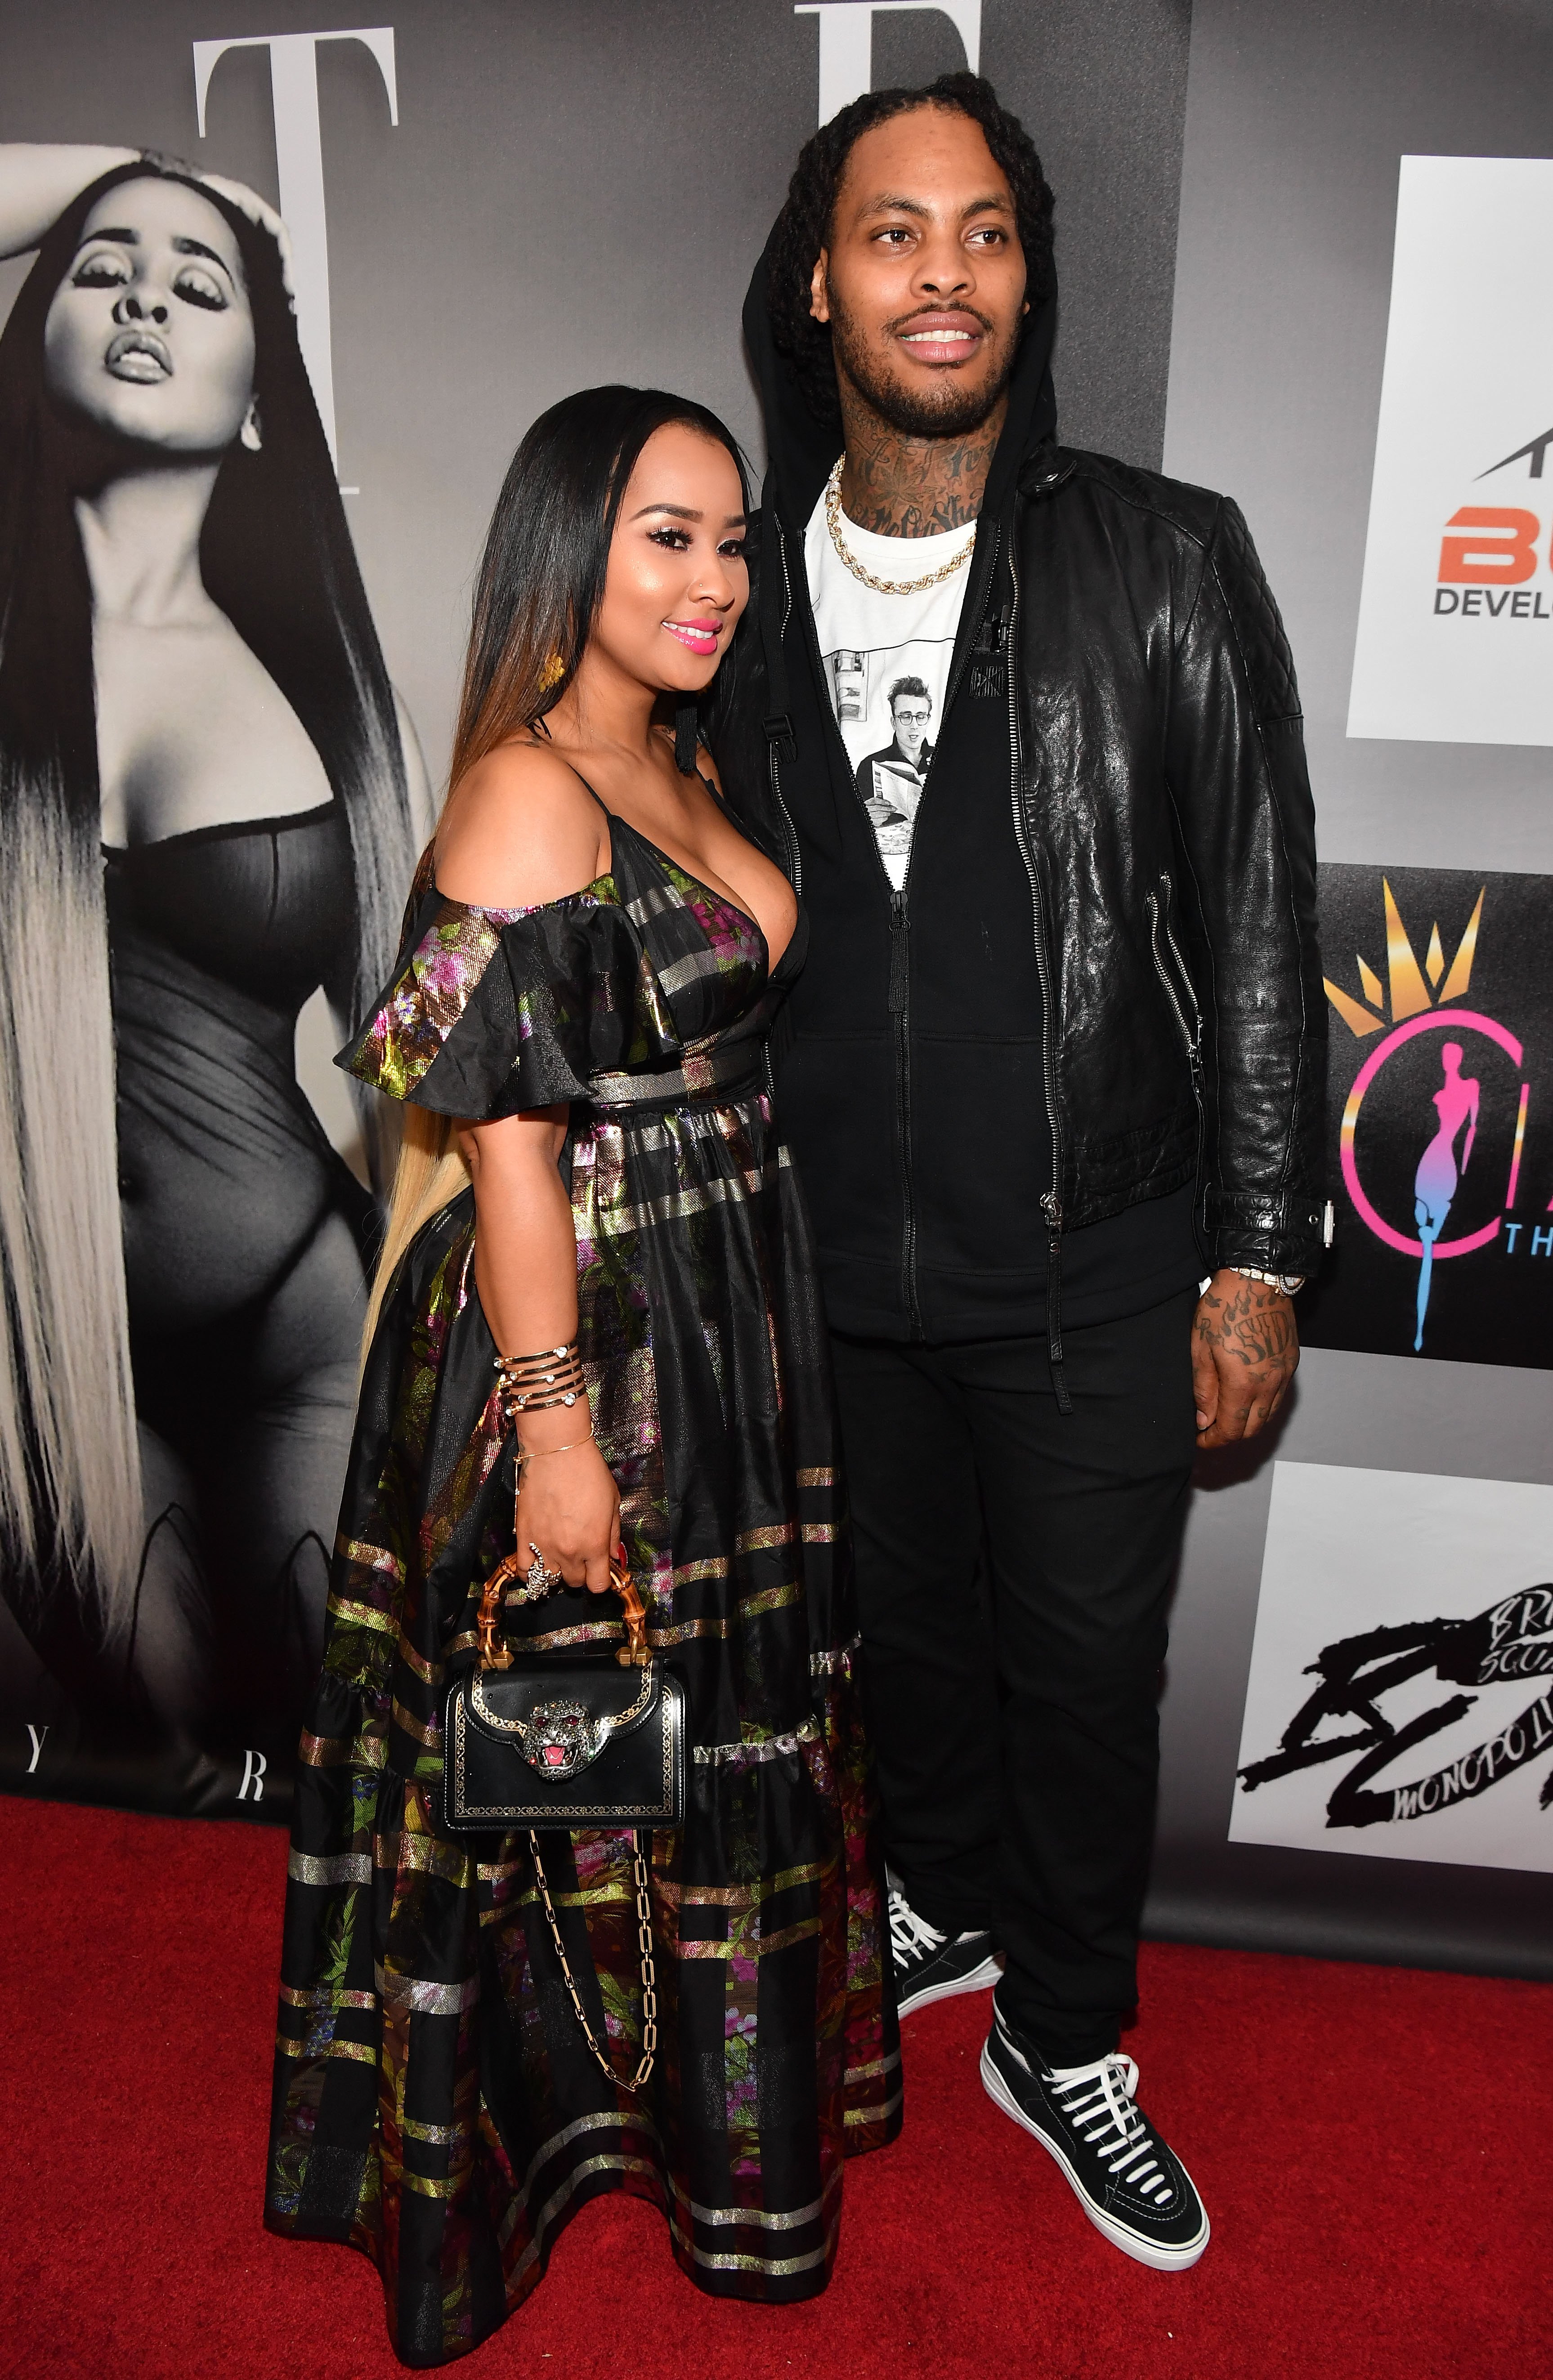 Tammy Rivera and Waka Flocka Flame at the EP Release Party of "Fate" in April 2018. | Photo: Getty Images